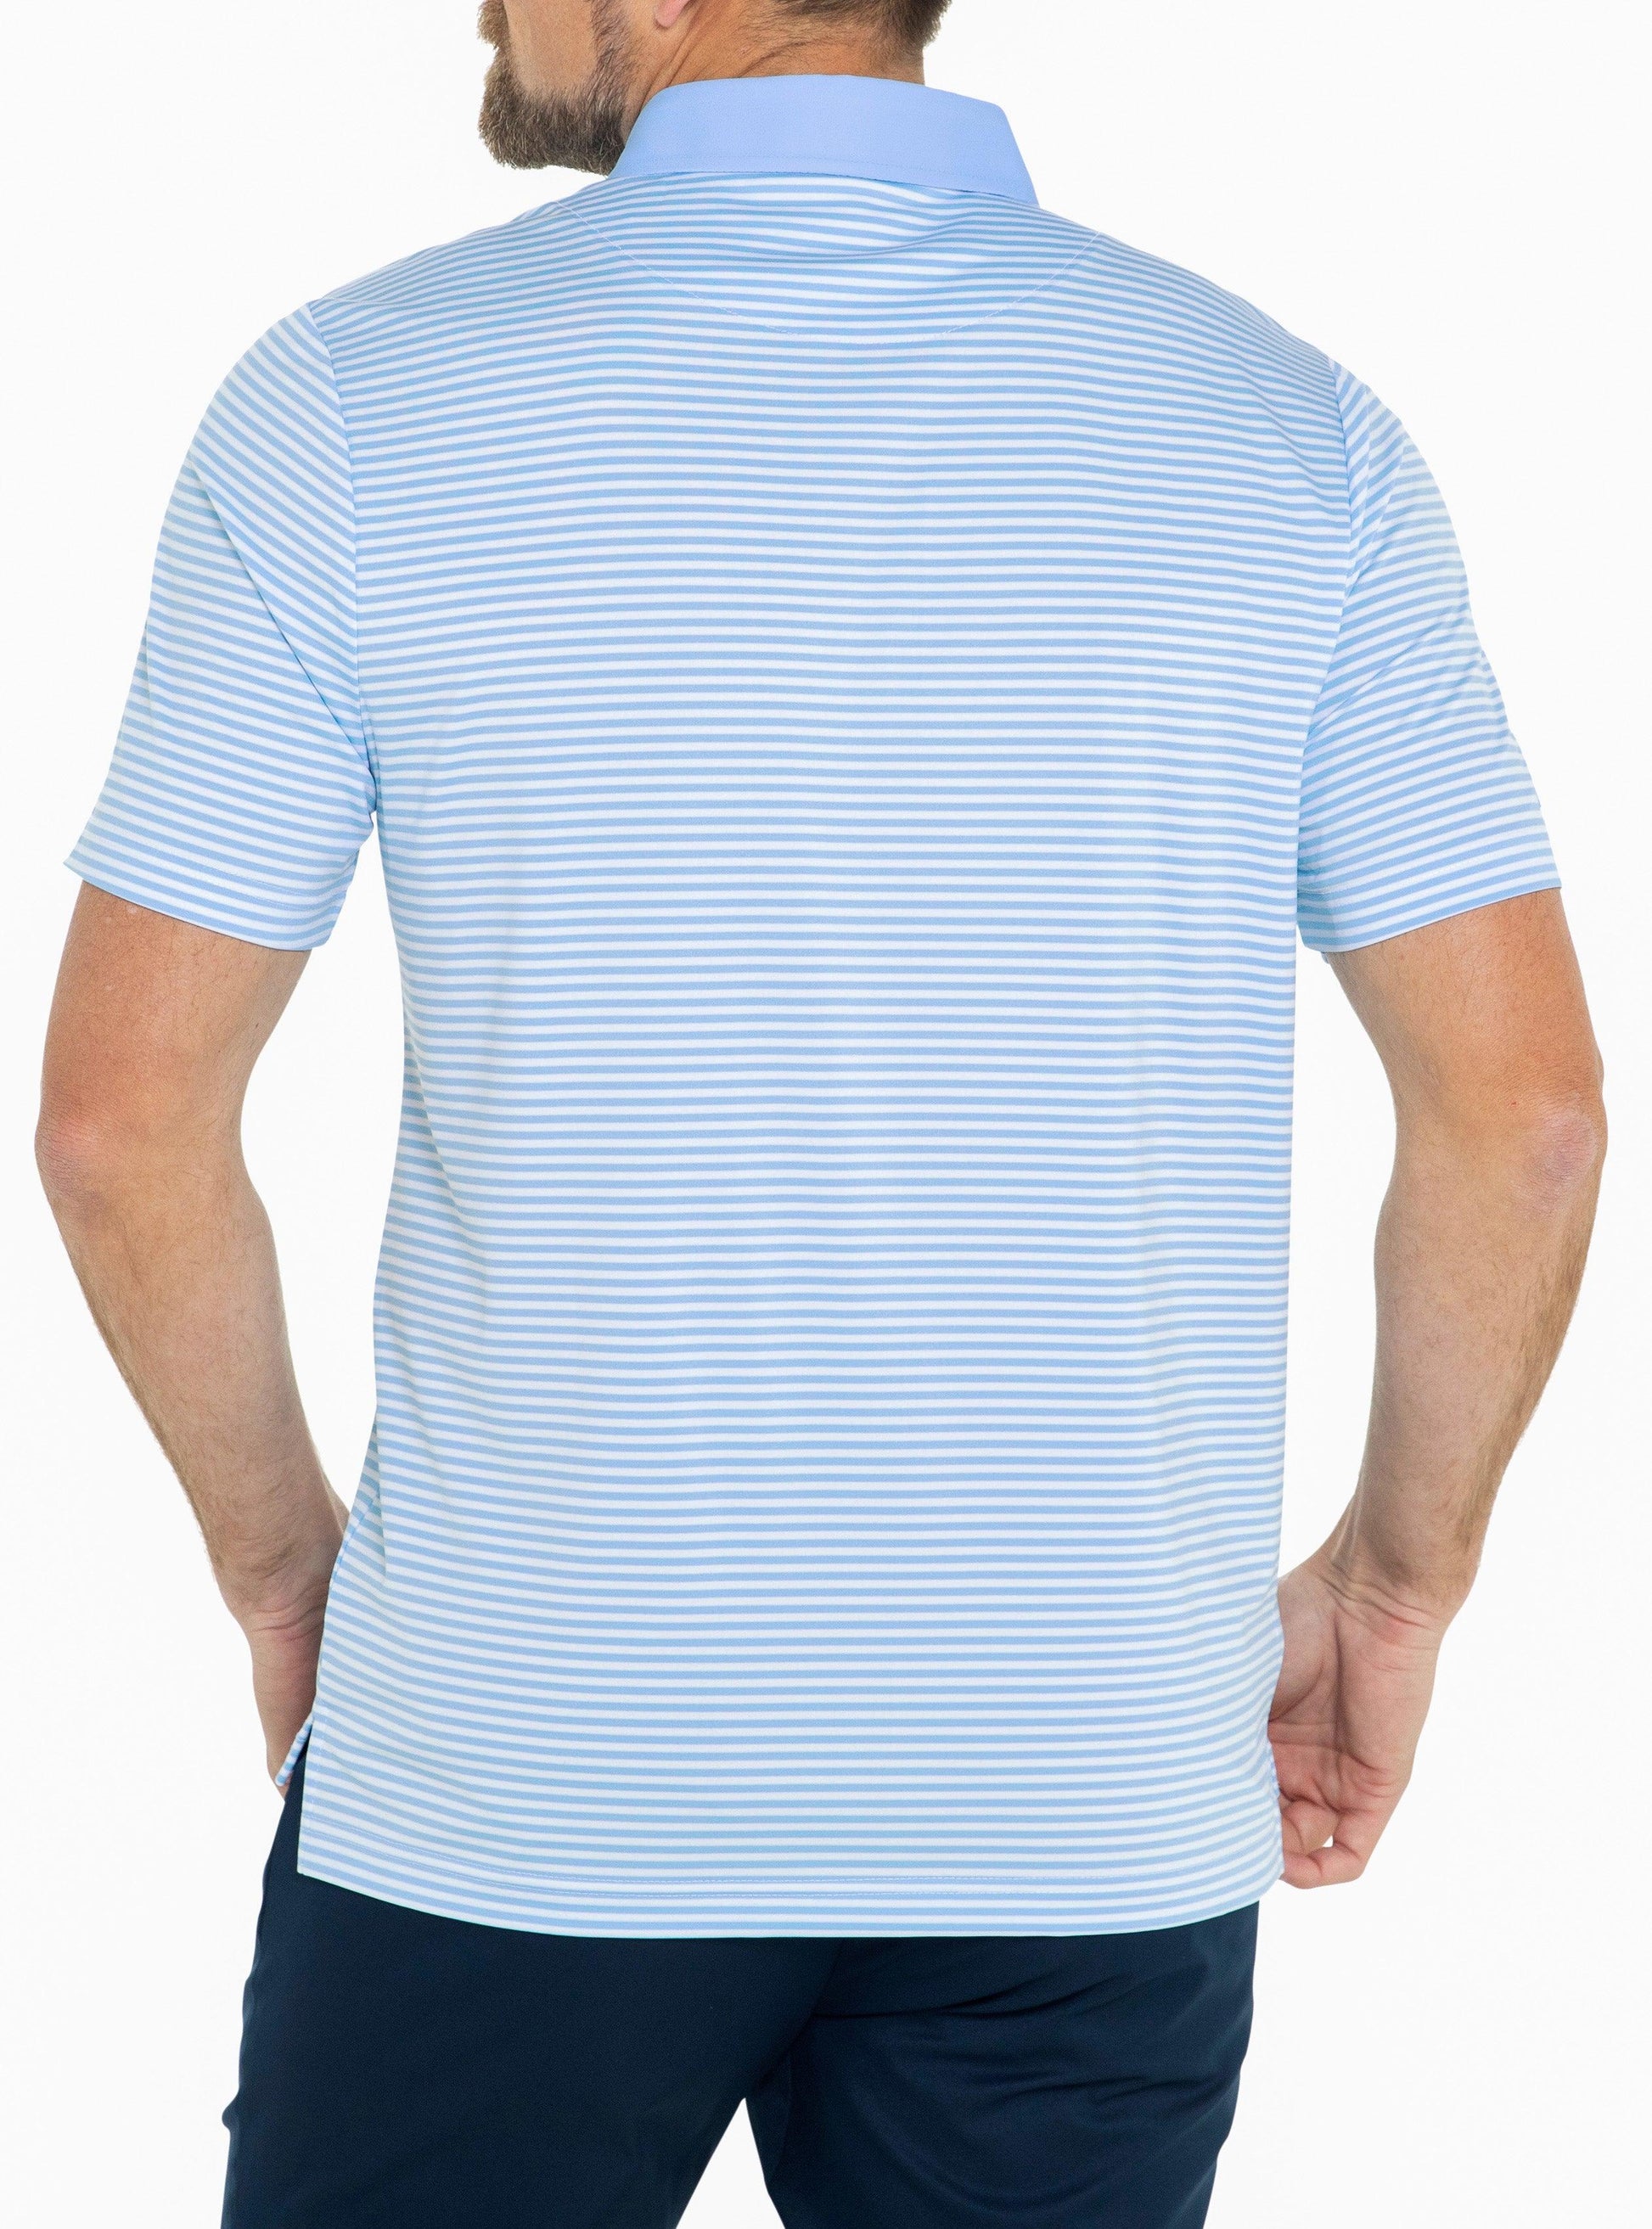 Mirage Polo–Summer Performance Polo by Good Good Golf S